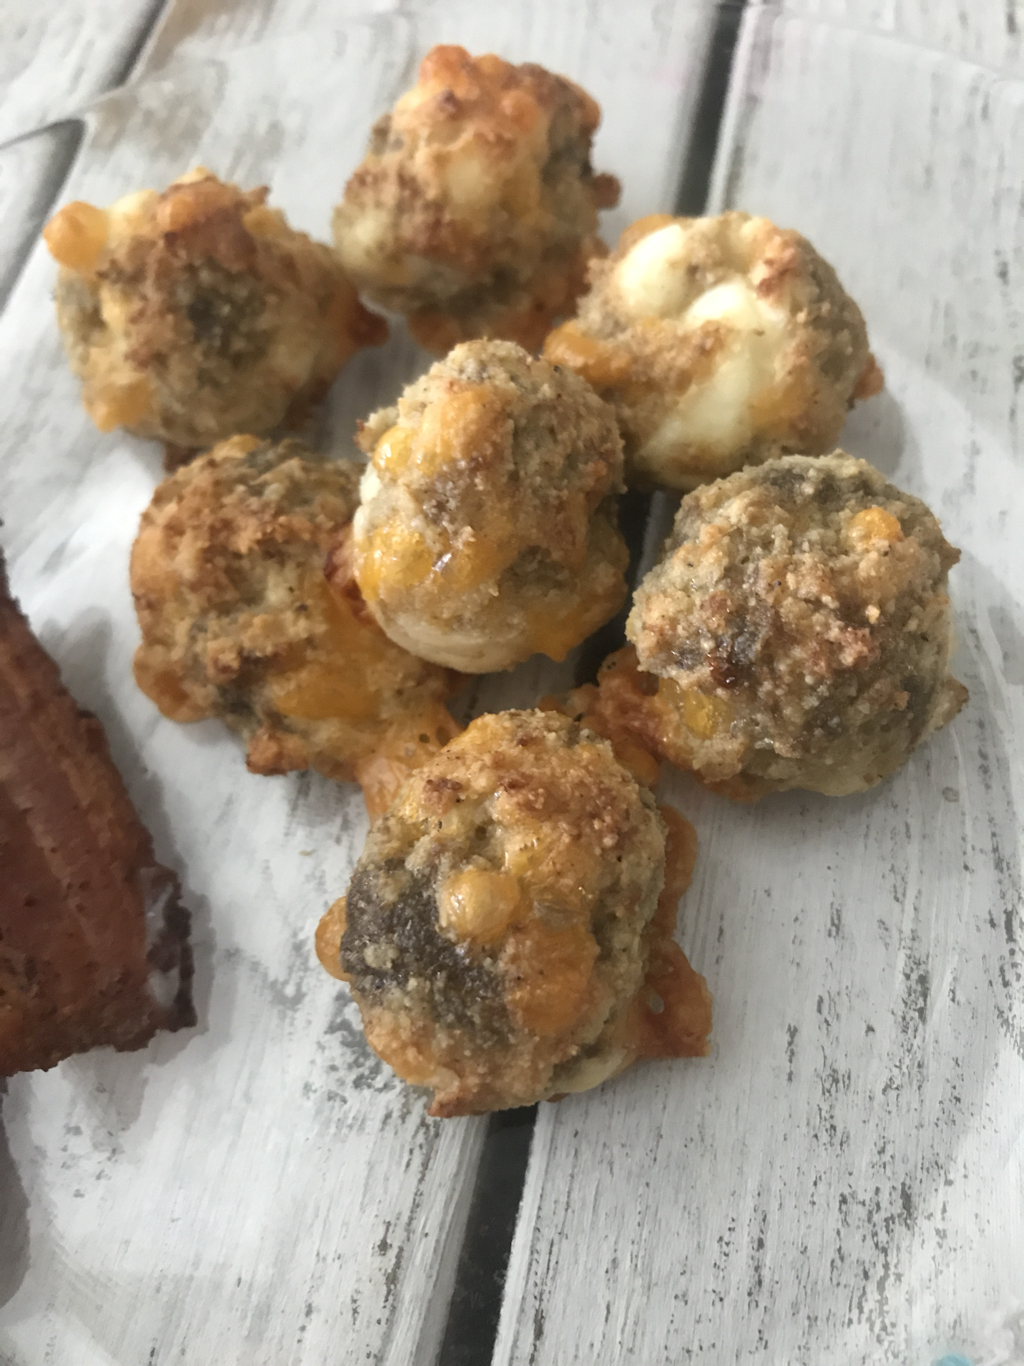 Momma's Sausage Balls Keto| Low Carb Style